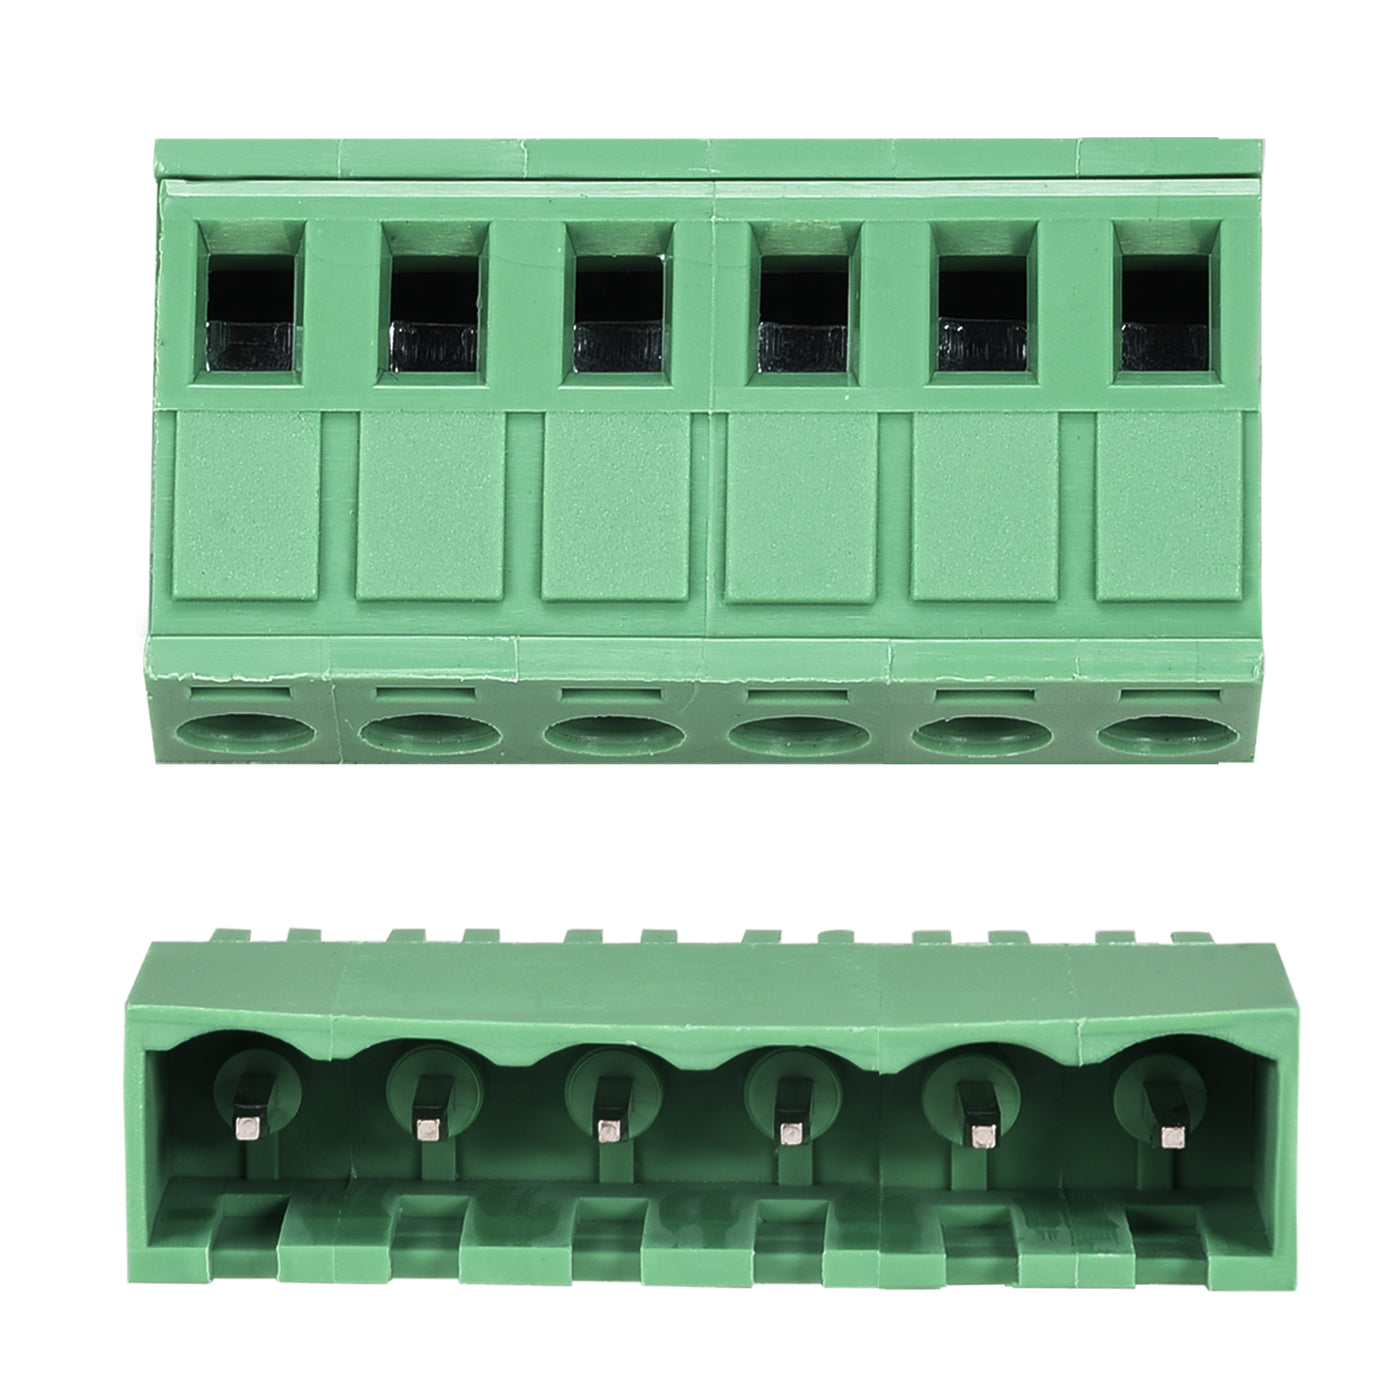 uxcell Uxcell 6 Pin 5.08mm Pitch Male Female PCB Screw Terminal Block 15 Sets